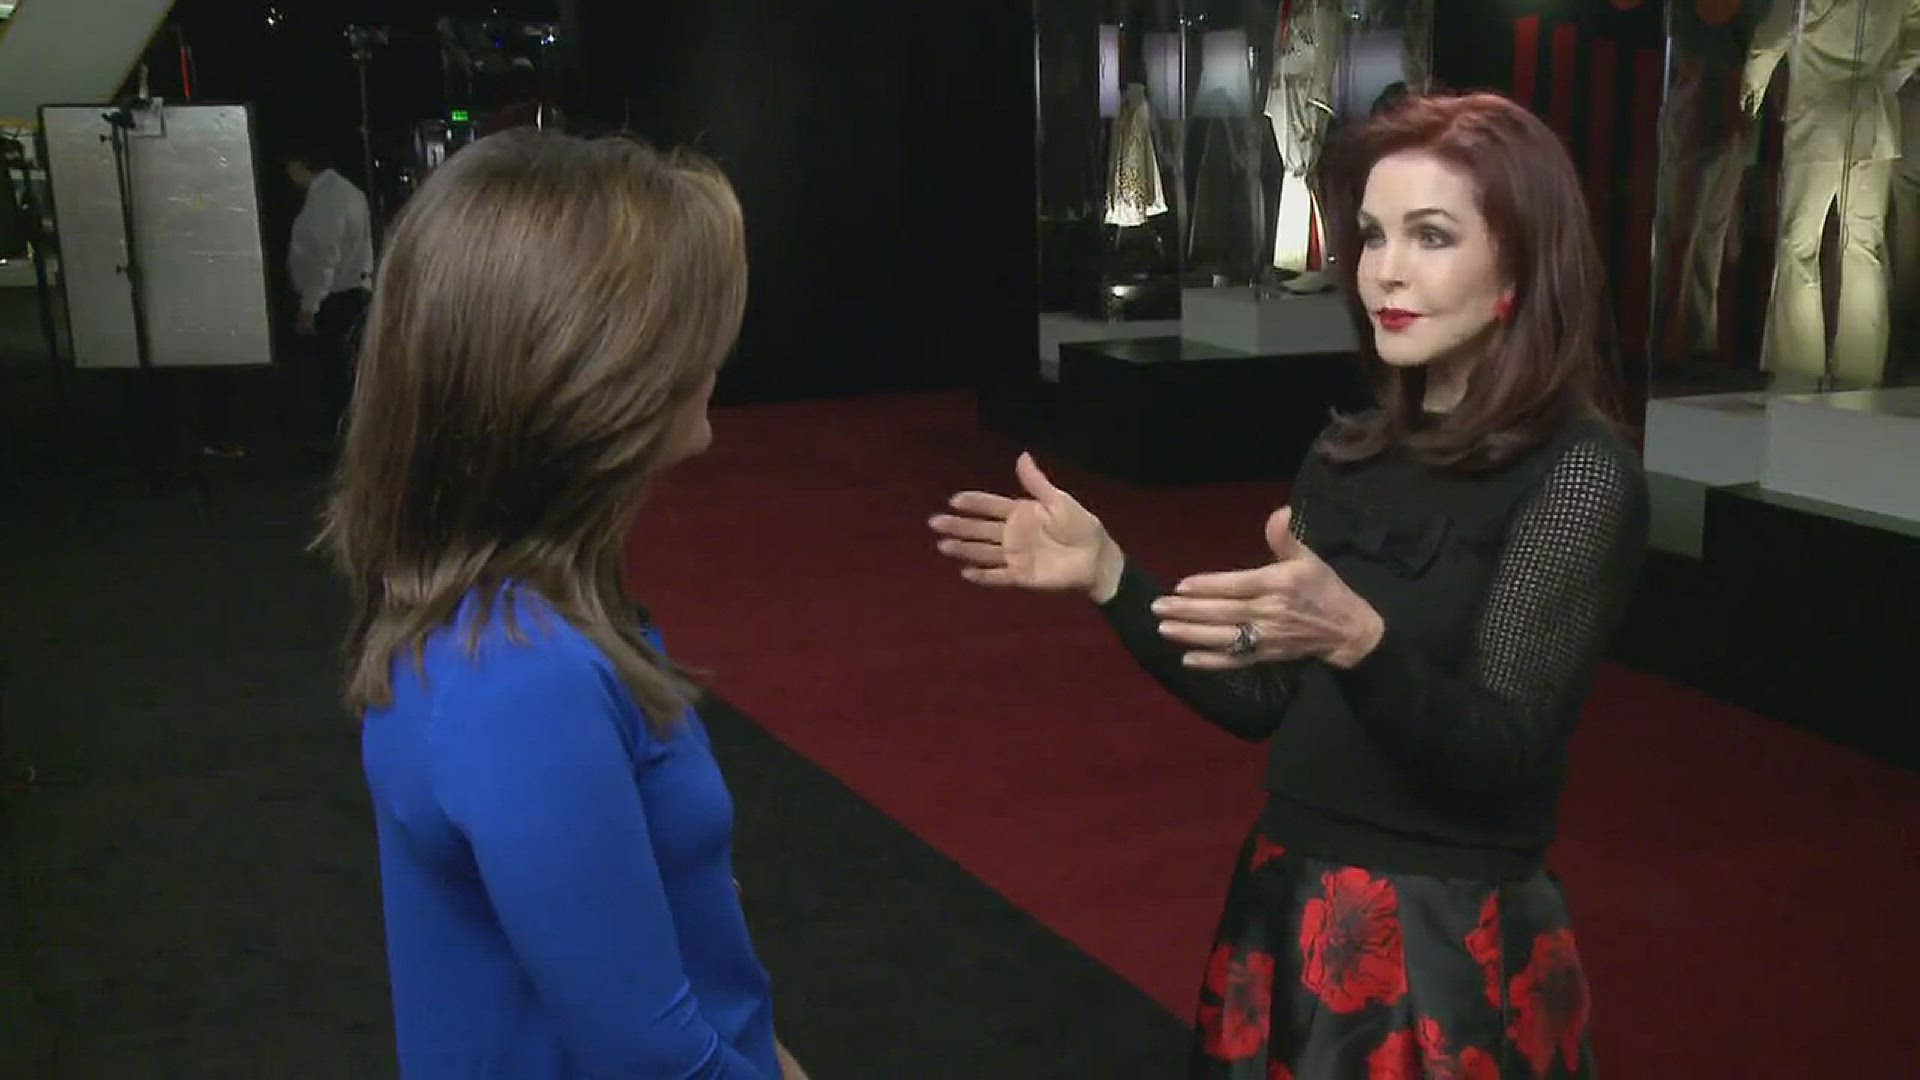 March 6, 2017: 10News anchor Beth Haynes speaks to Priscilla Presley about the new expansion to Elvis Presley's home Graceland.